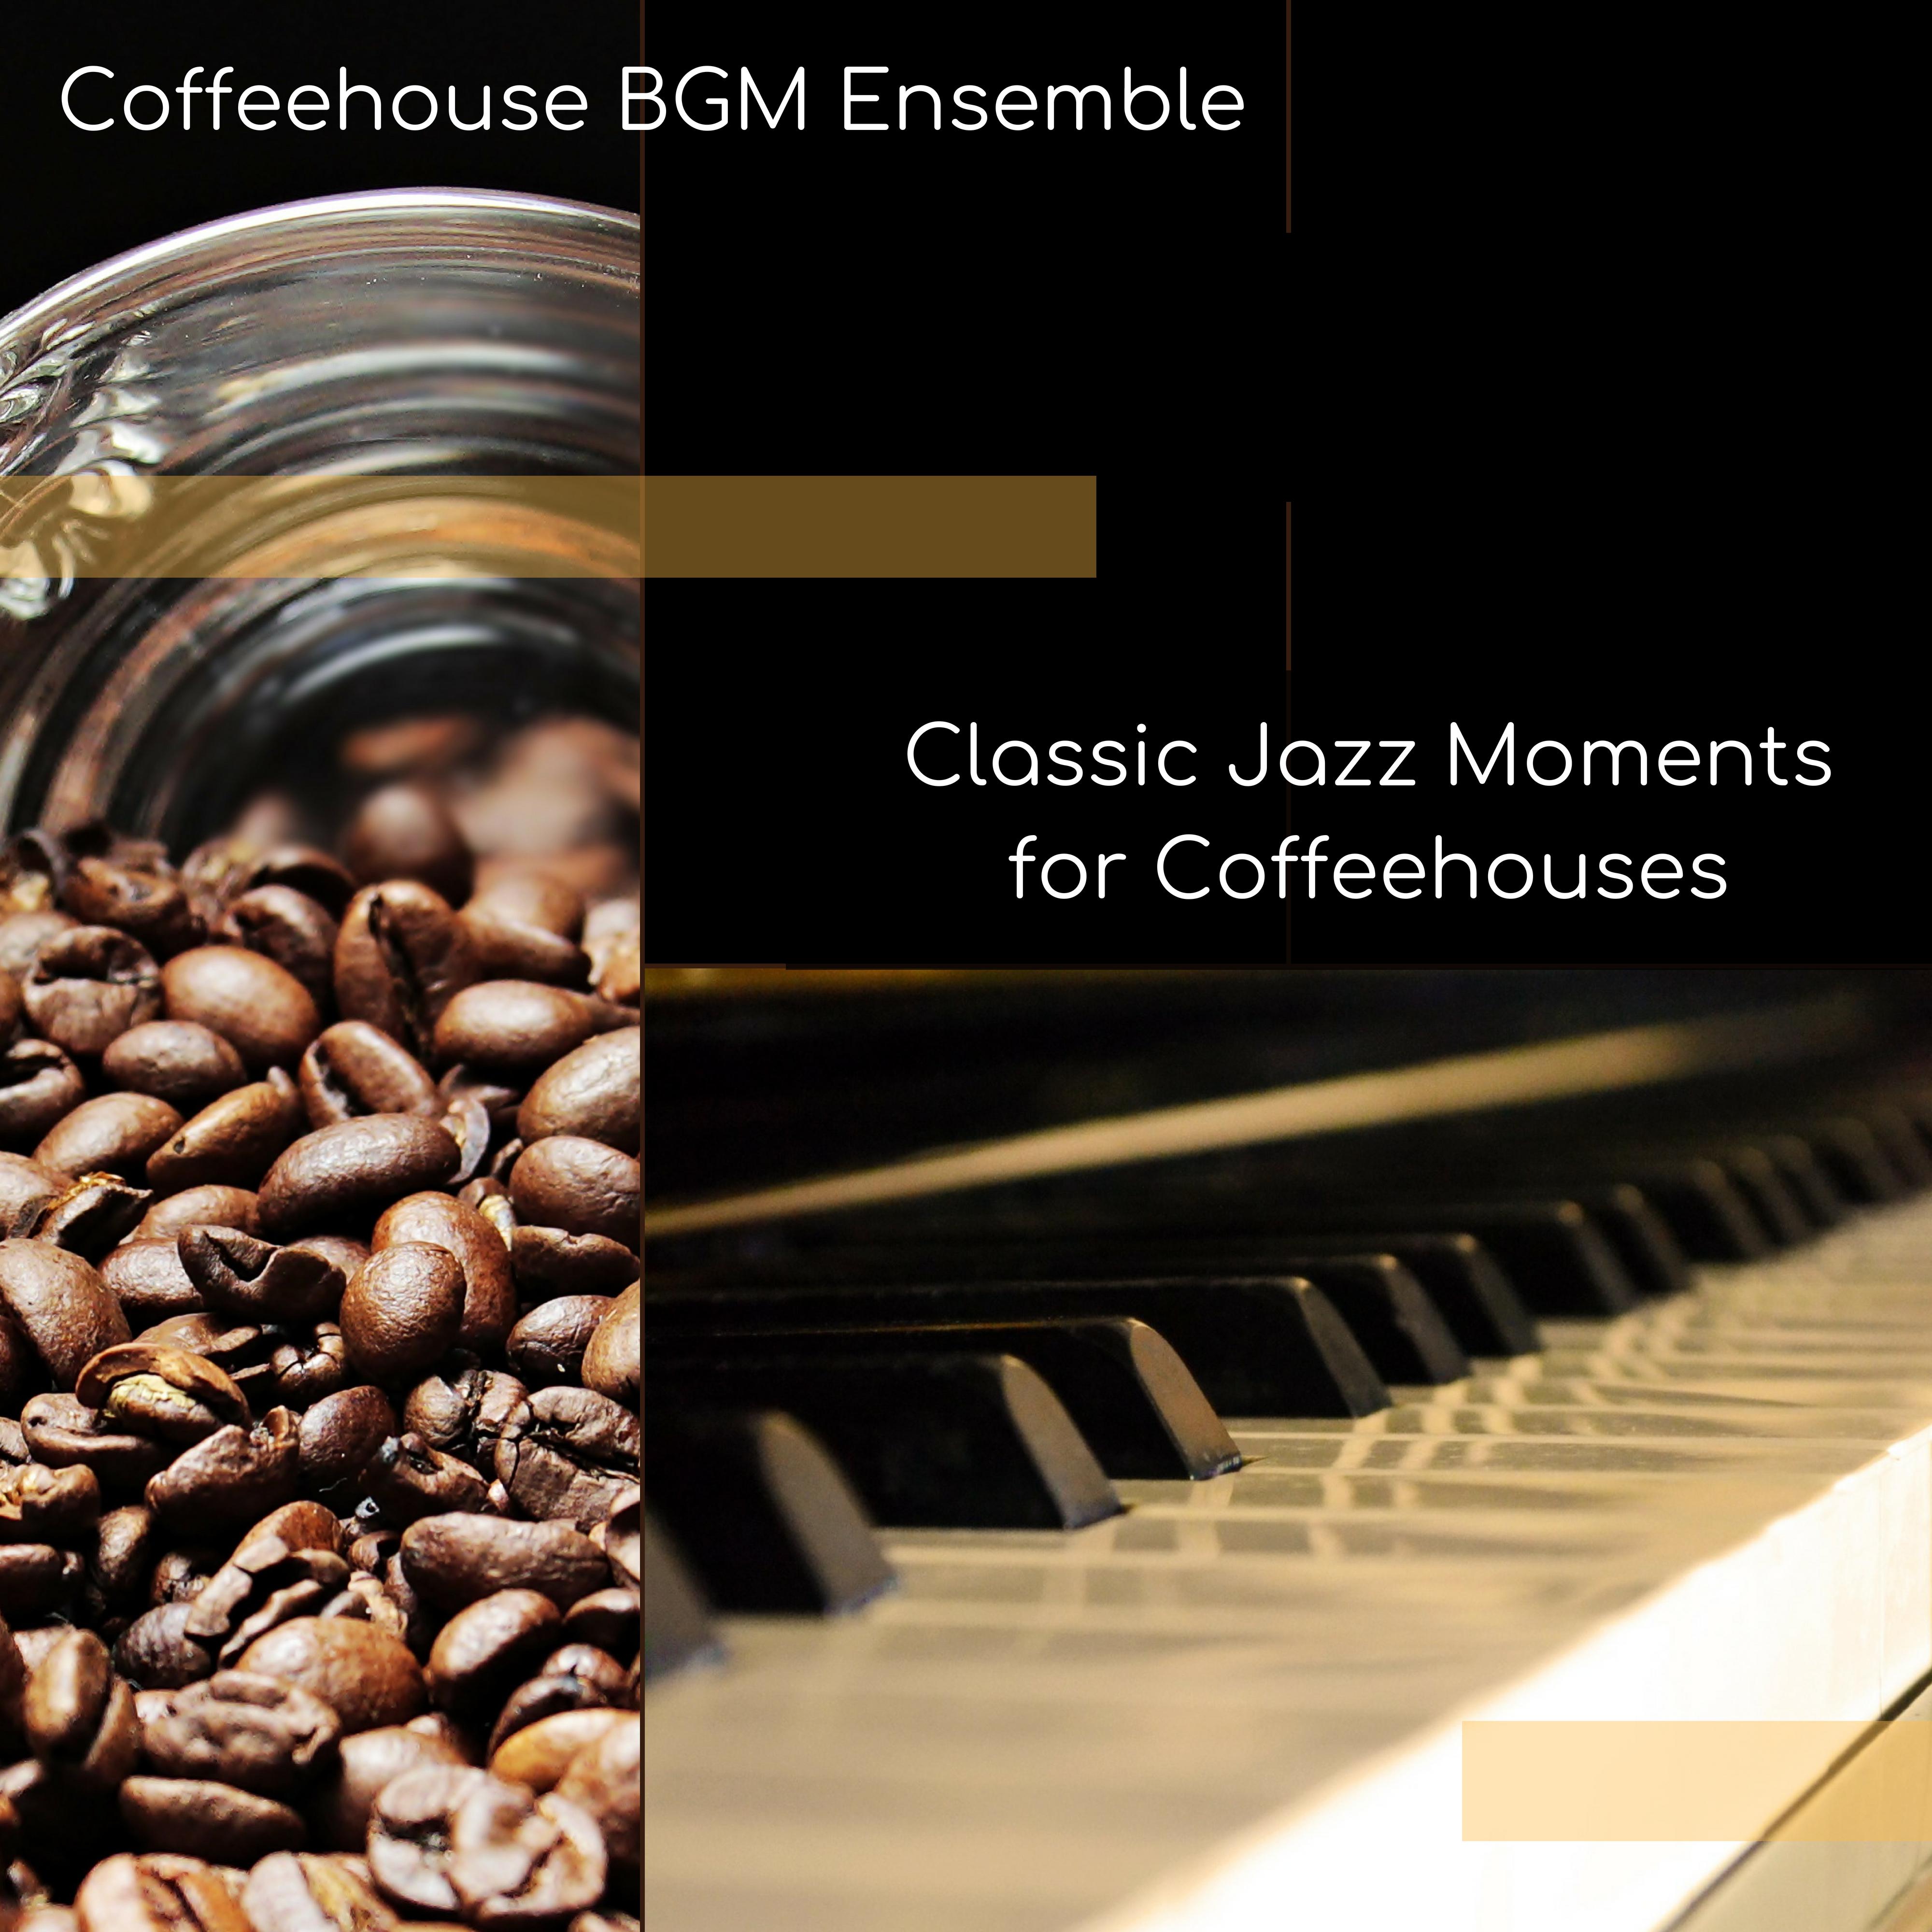 Brilliant Easy Listening Bossanova Jazz for Coffee and Cake at Coffeehouses